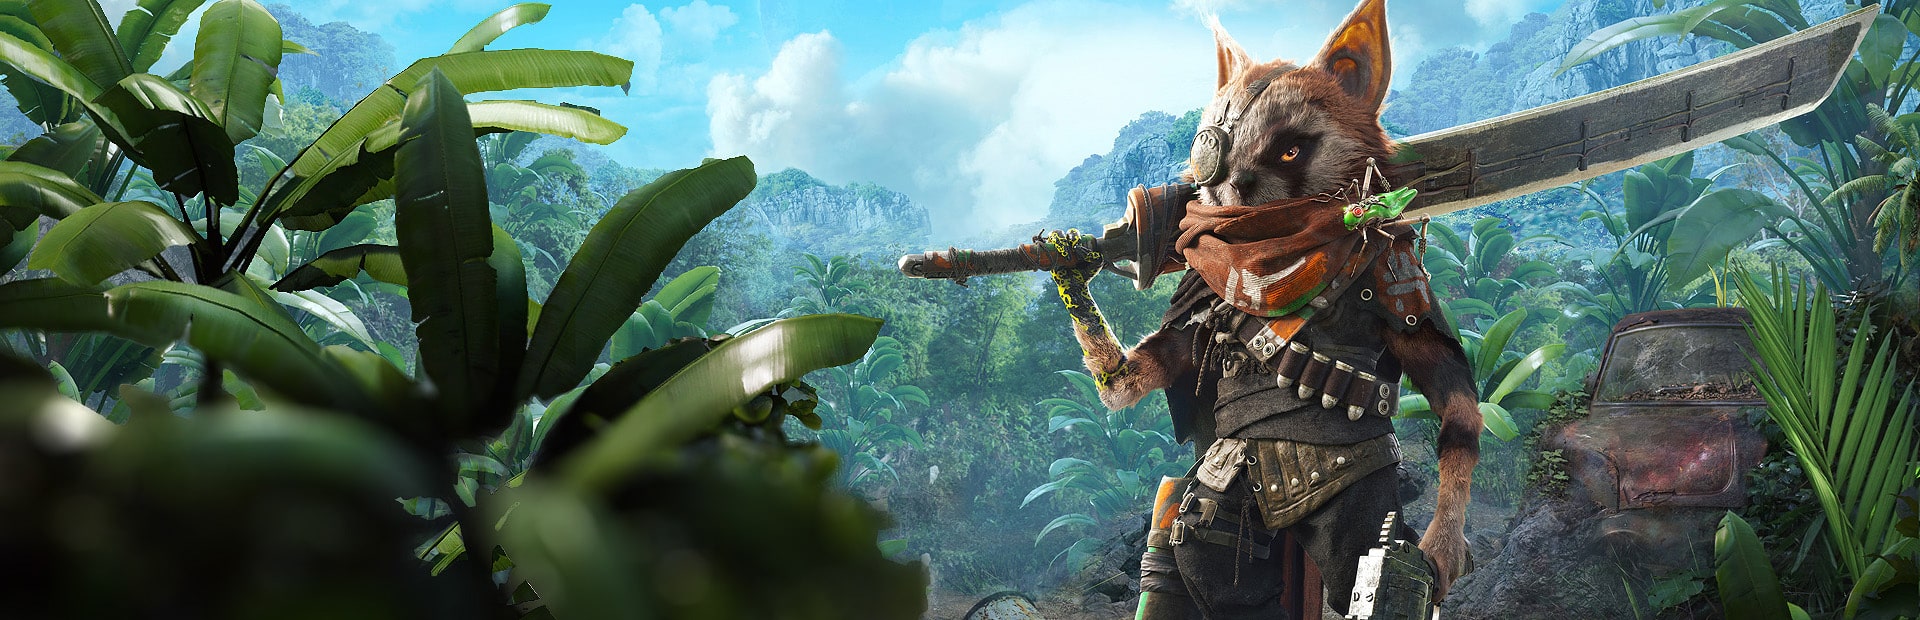 Biomutant: Unleash Your Mutant Powers in a Vibrant Open World – Now 68% Off at PJ's Games!